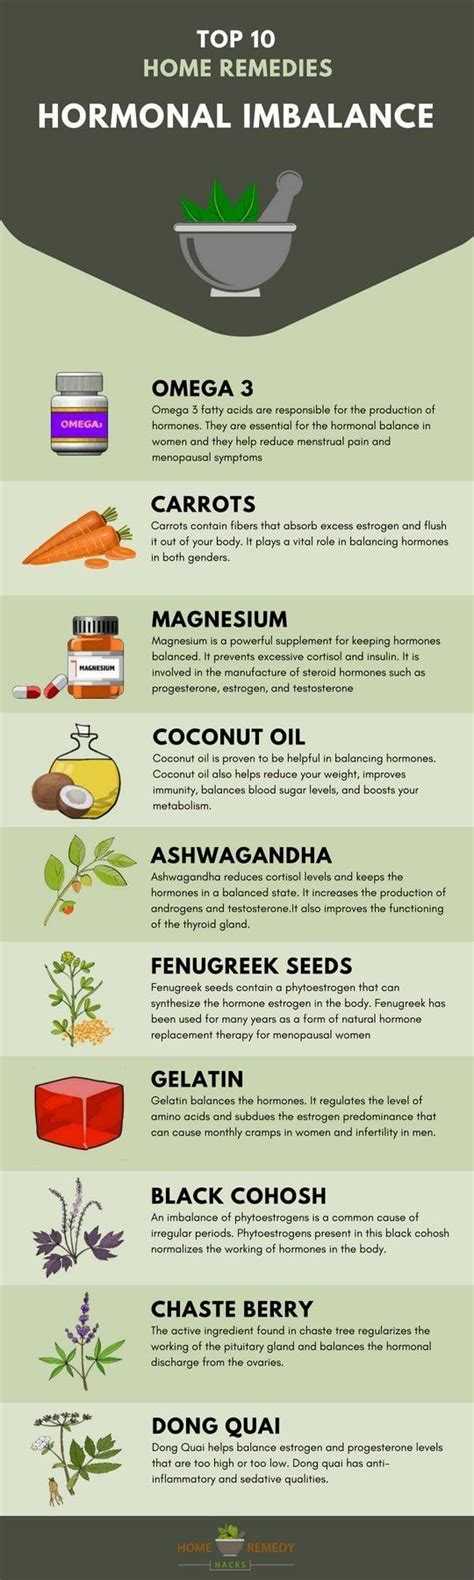 19 Natural Home Remedies For Hormonal Imbalance Natural Home Remedies